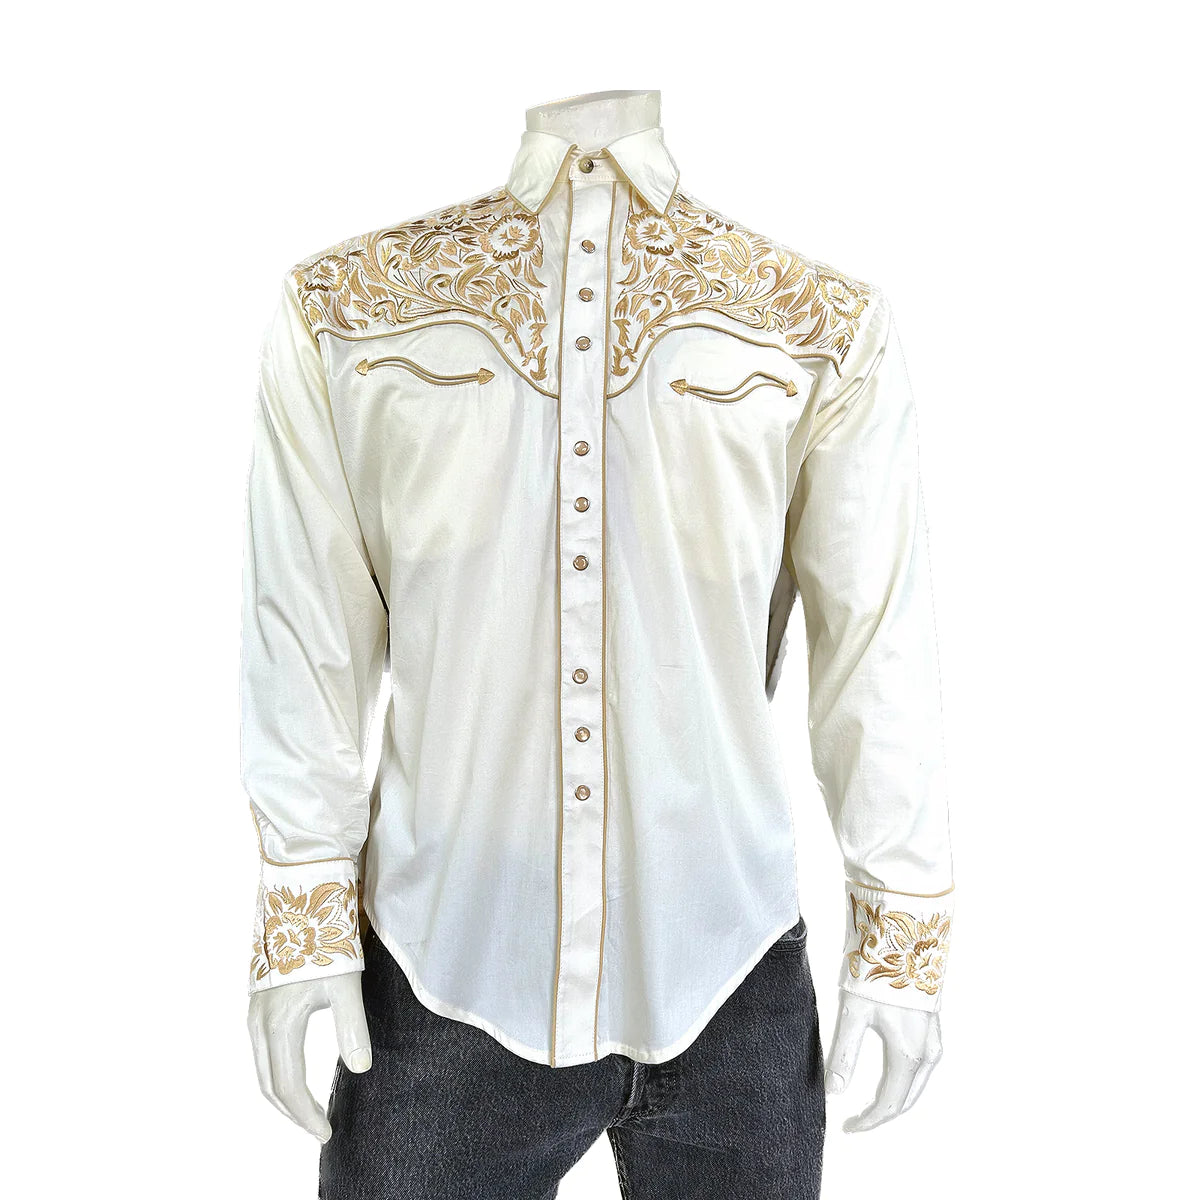 Men's Vintage Western Shirt Collection: Rockmount Tooling Embroidery